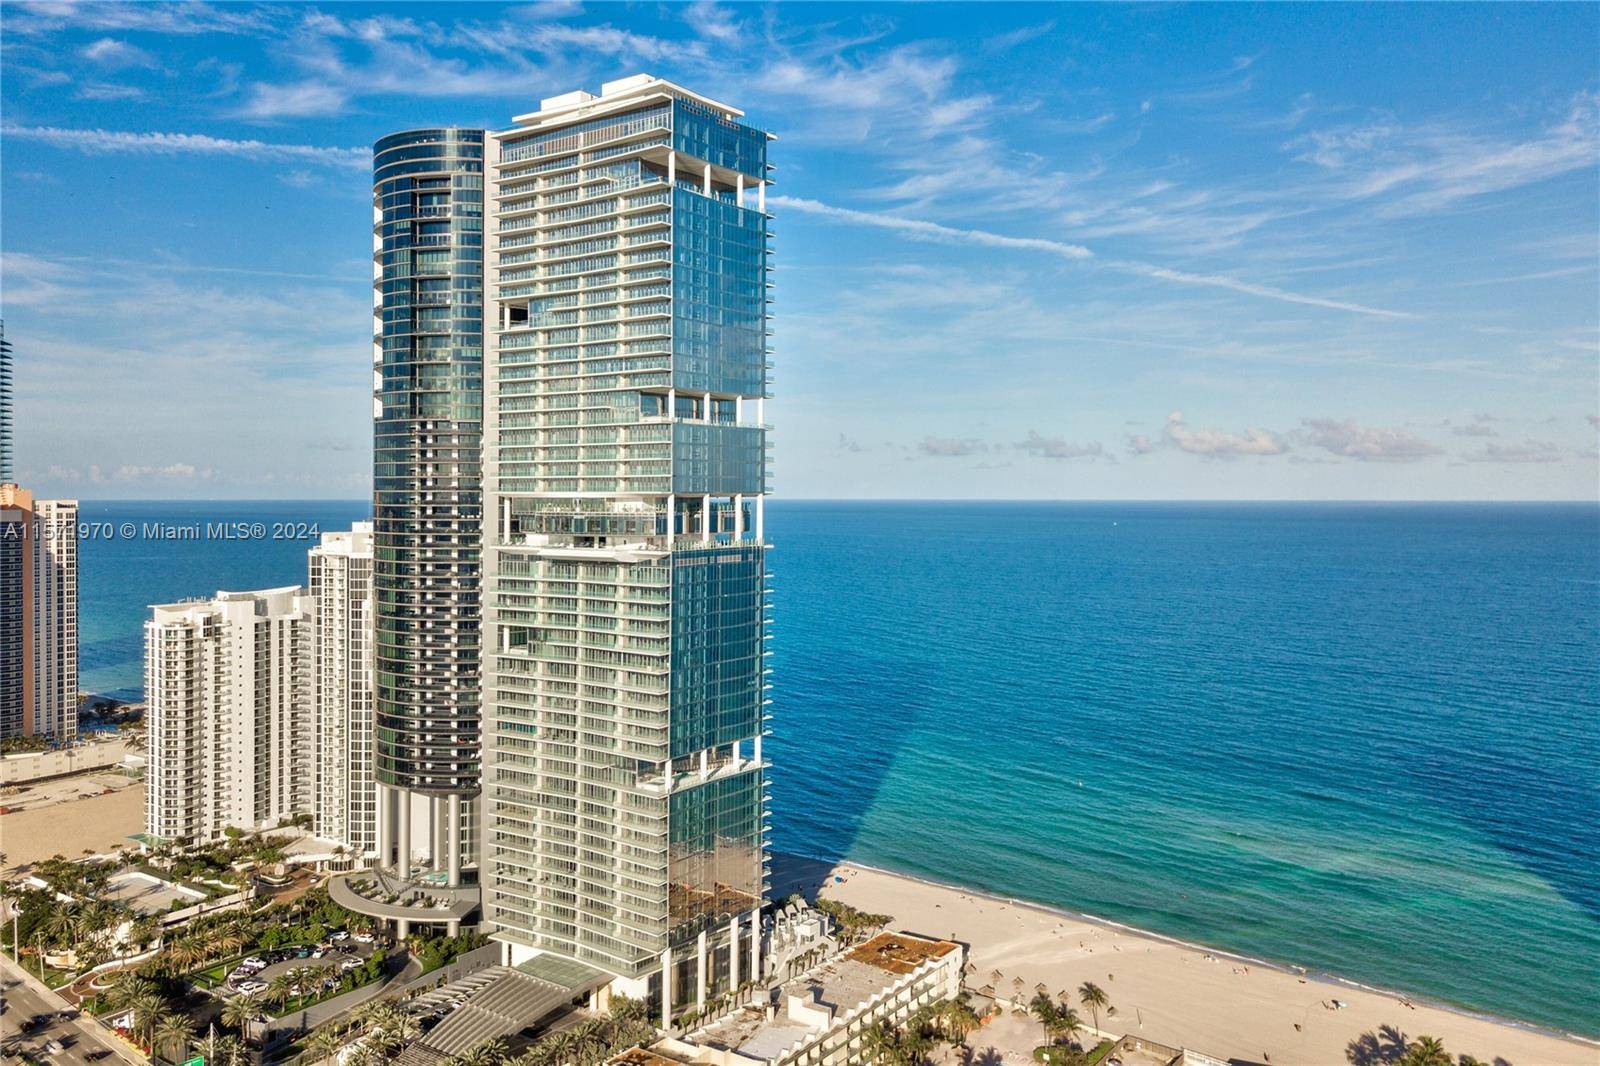 Ultra luxury, beachfront Turnberry Ocean Club Residence, one of the most Exclusive Oceanfront building in Sunny Isles Beach.